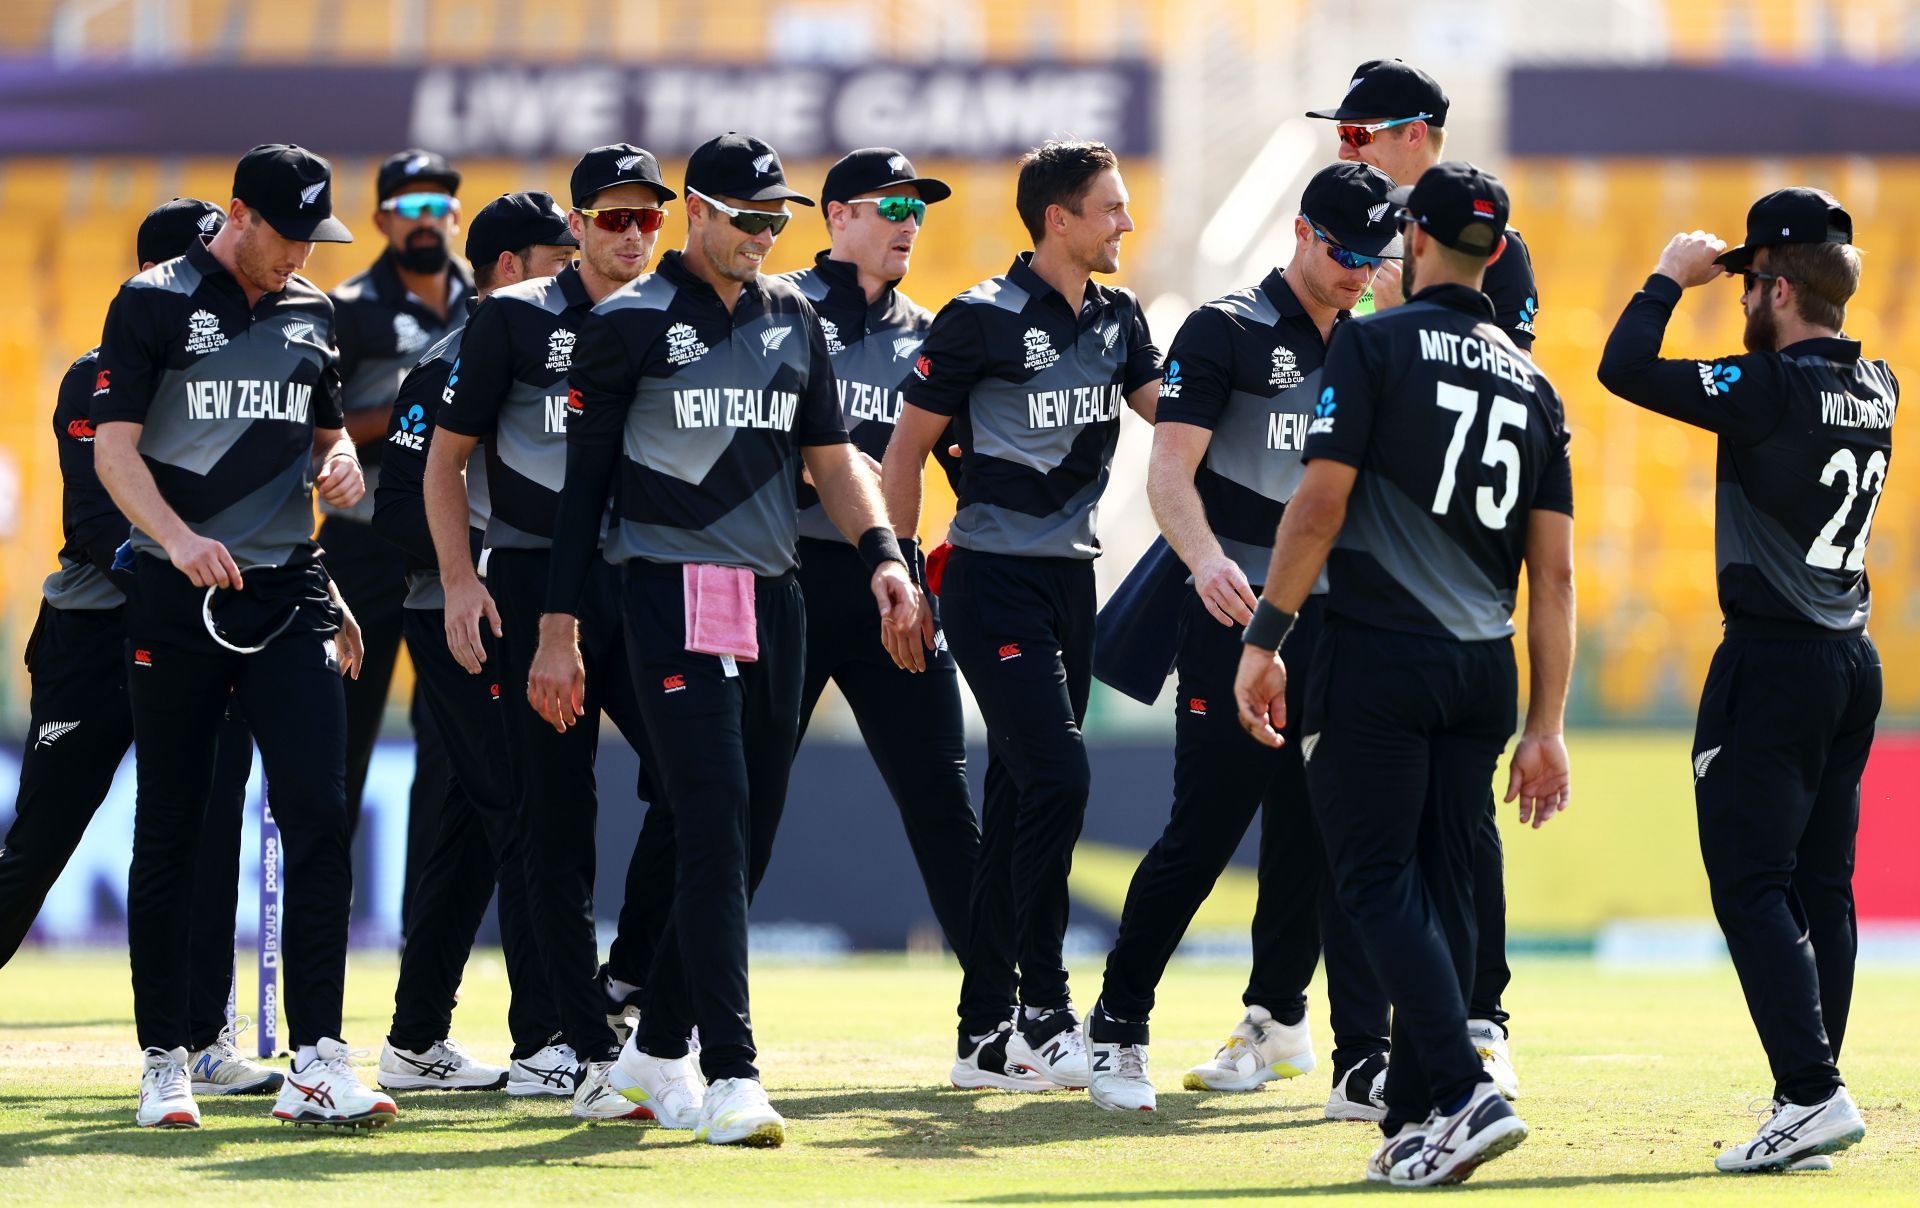 New Zealand cricket team. (Pic: Getty Images)